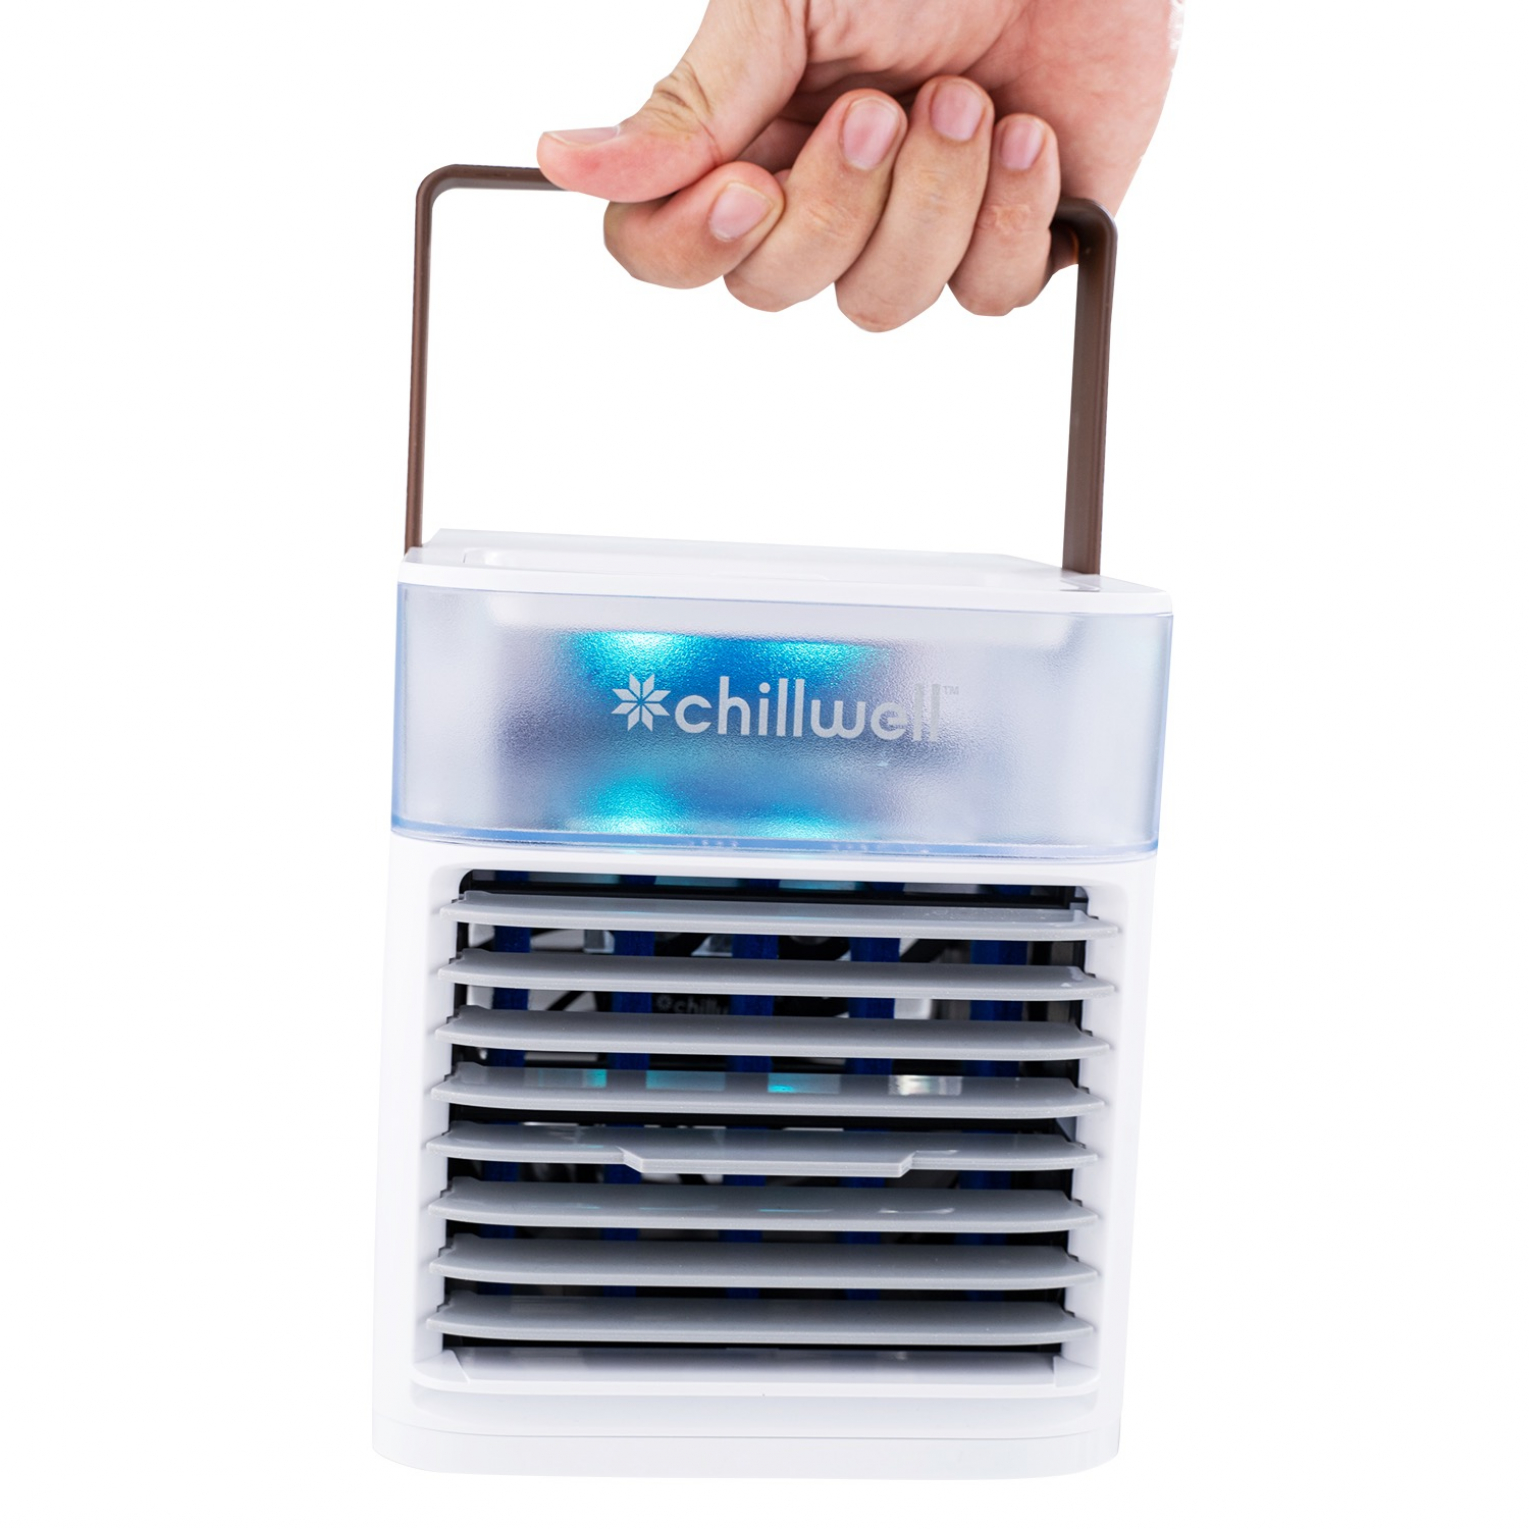 Chillwell AC Real Review